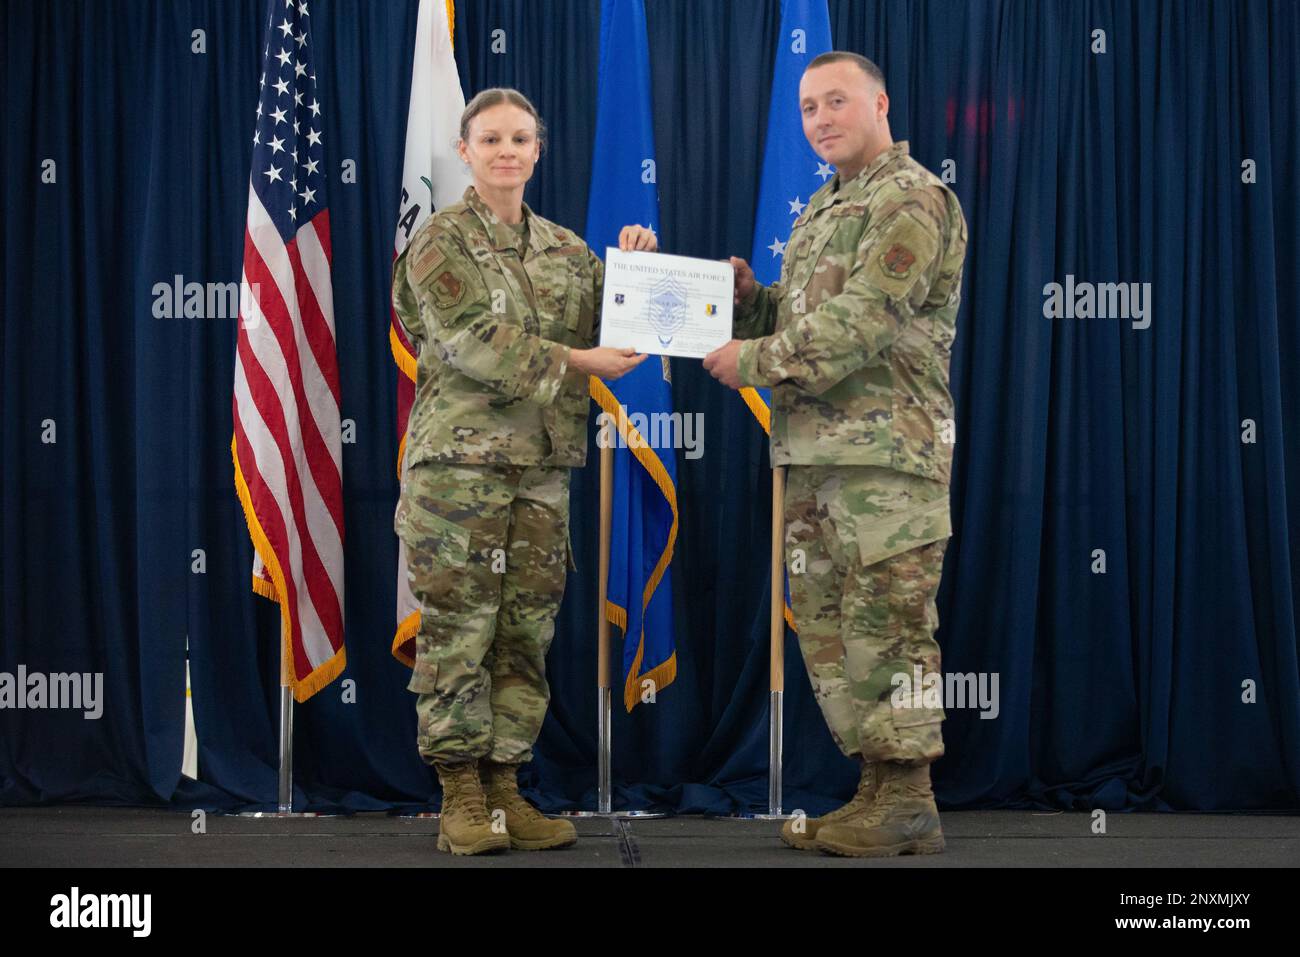 U.S. Air Force Col. Katherine Waterman, 129th Rescue Wing maintenance group commander, promotes Senior Master Sgt. Joshua Dunn to the rank of Chief Master Sergeant at Moffett Federal Airfield, Feb. 4, 2023. Dunne has served in the Air Force for nearly 18 years. (Air National Guard photo by Airman 1st Class Serena Smith) Stock Photo